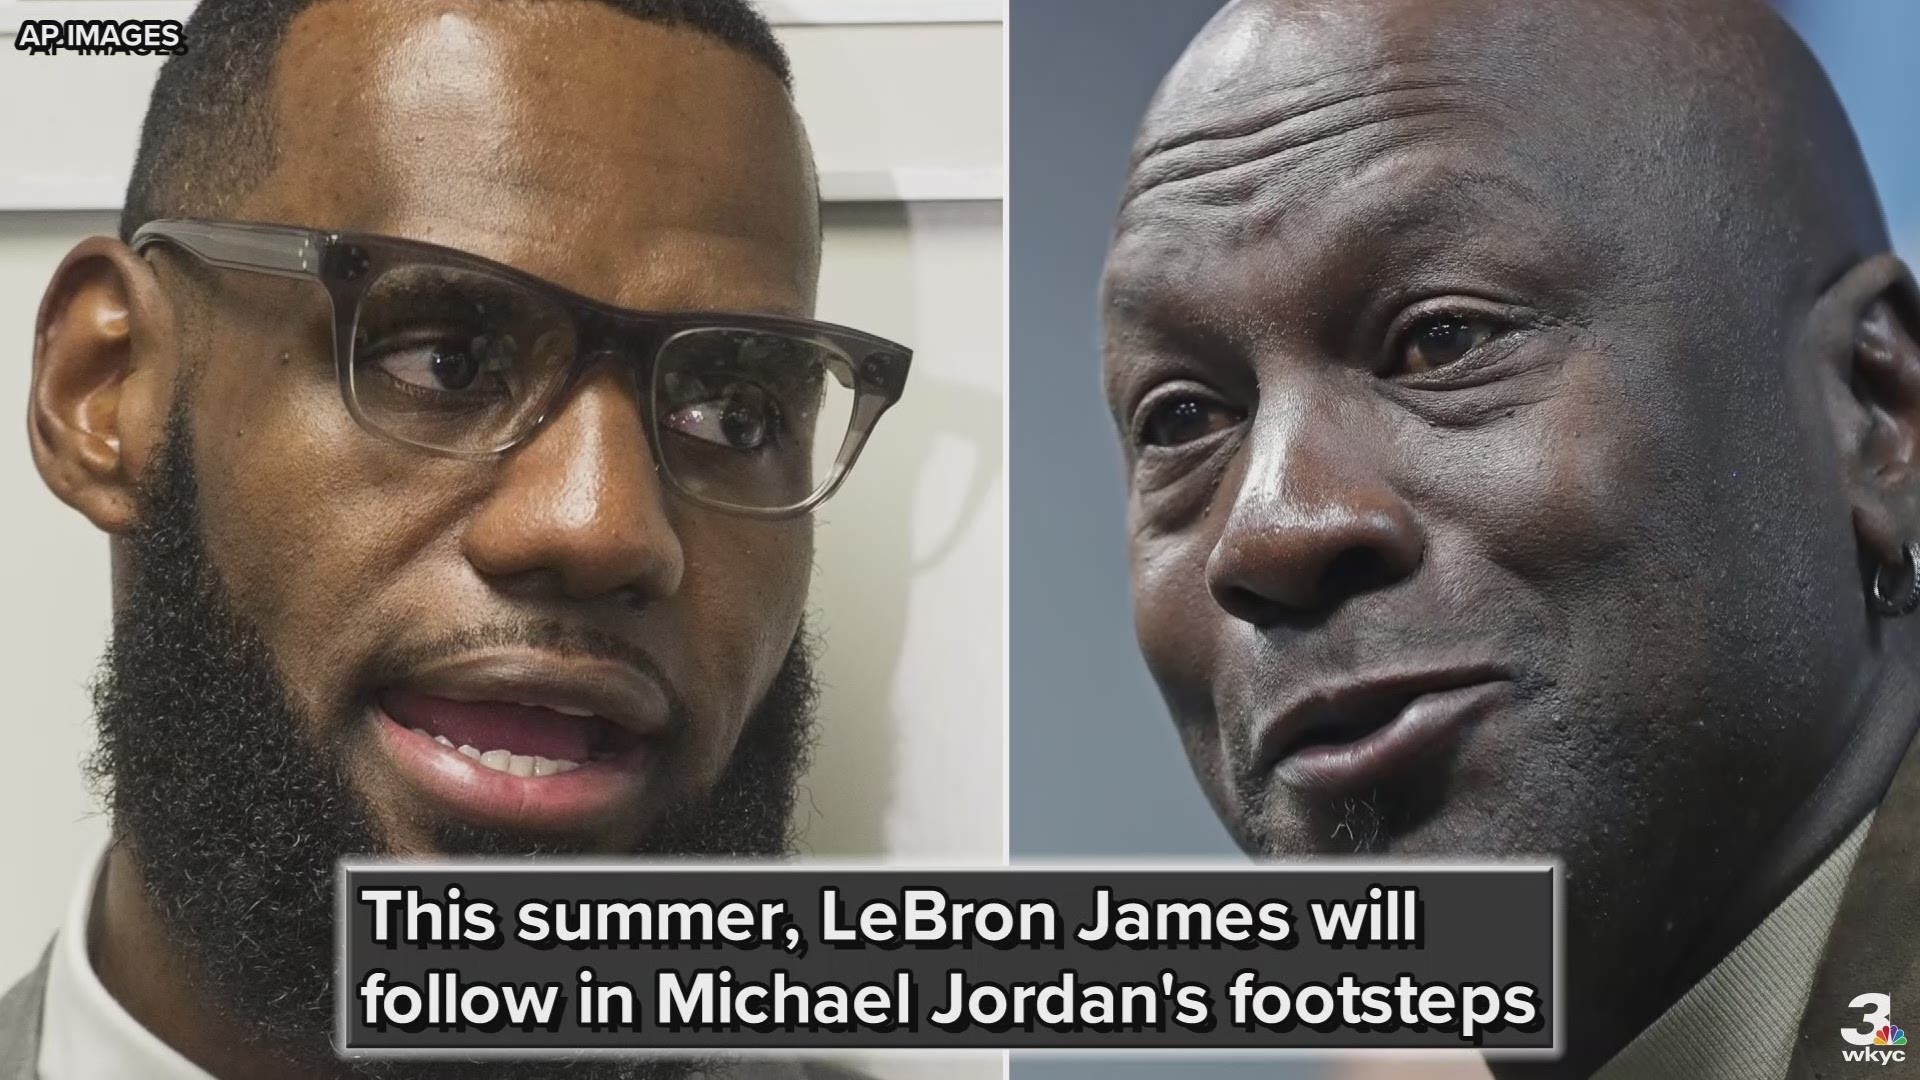 LeBron James will star in and produce the long-awaited sequel to 1998's 'Space Jam.'